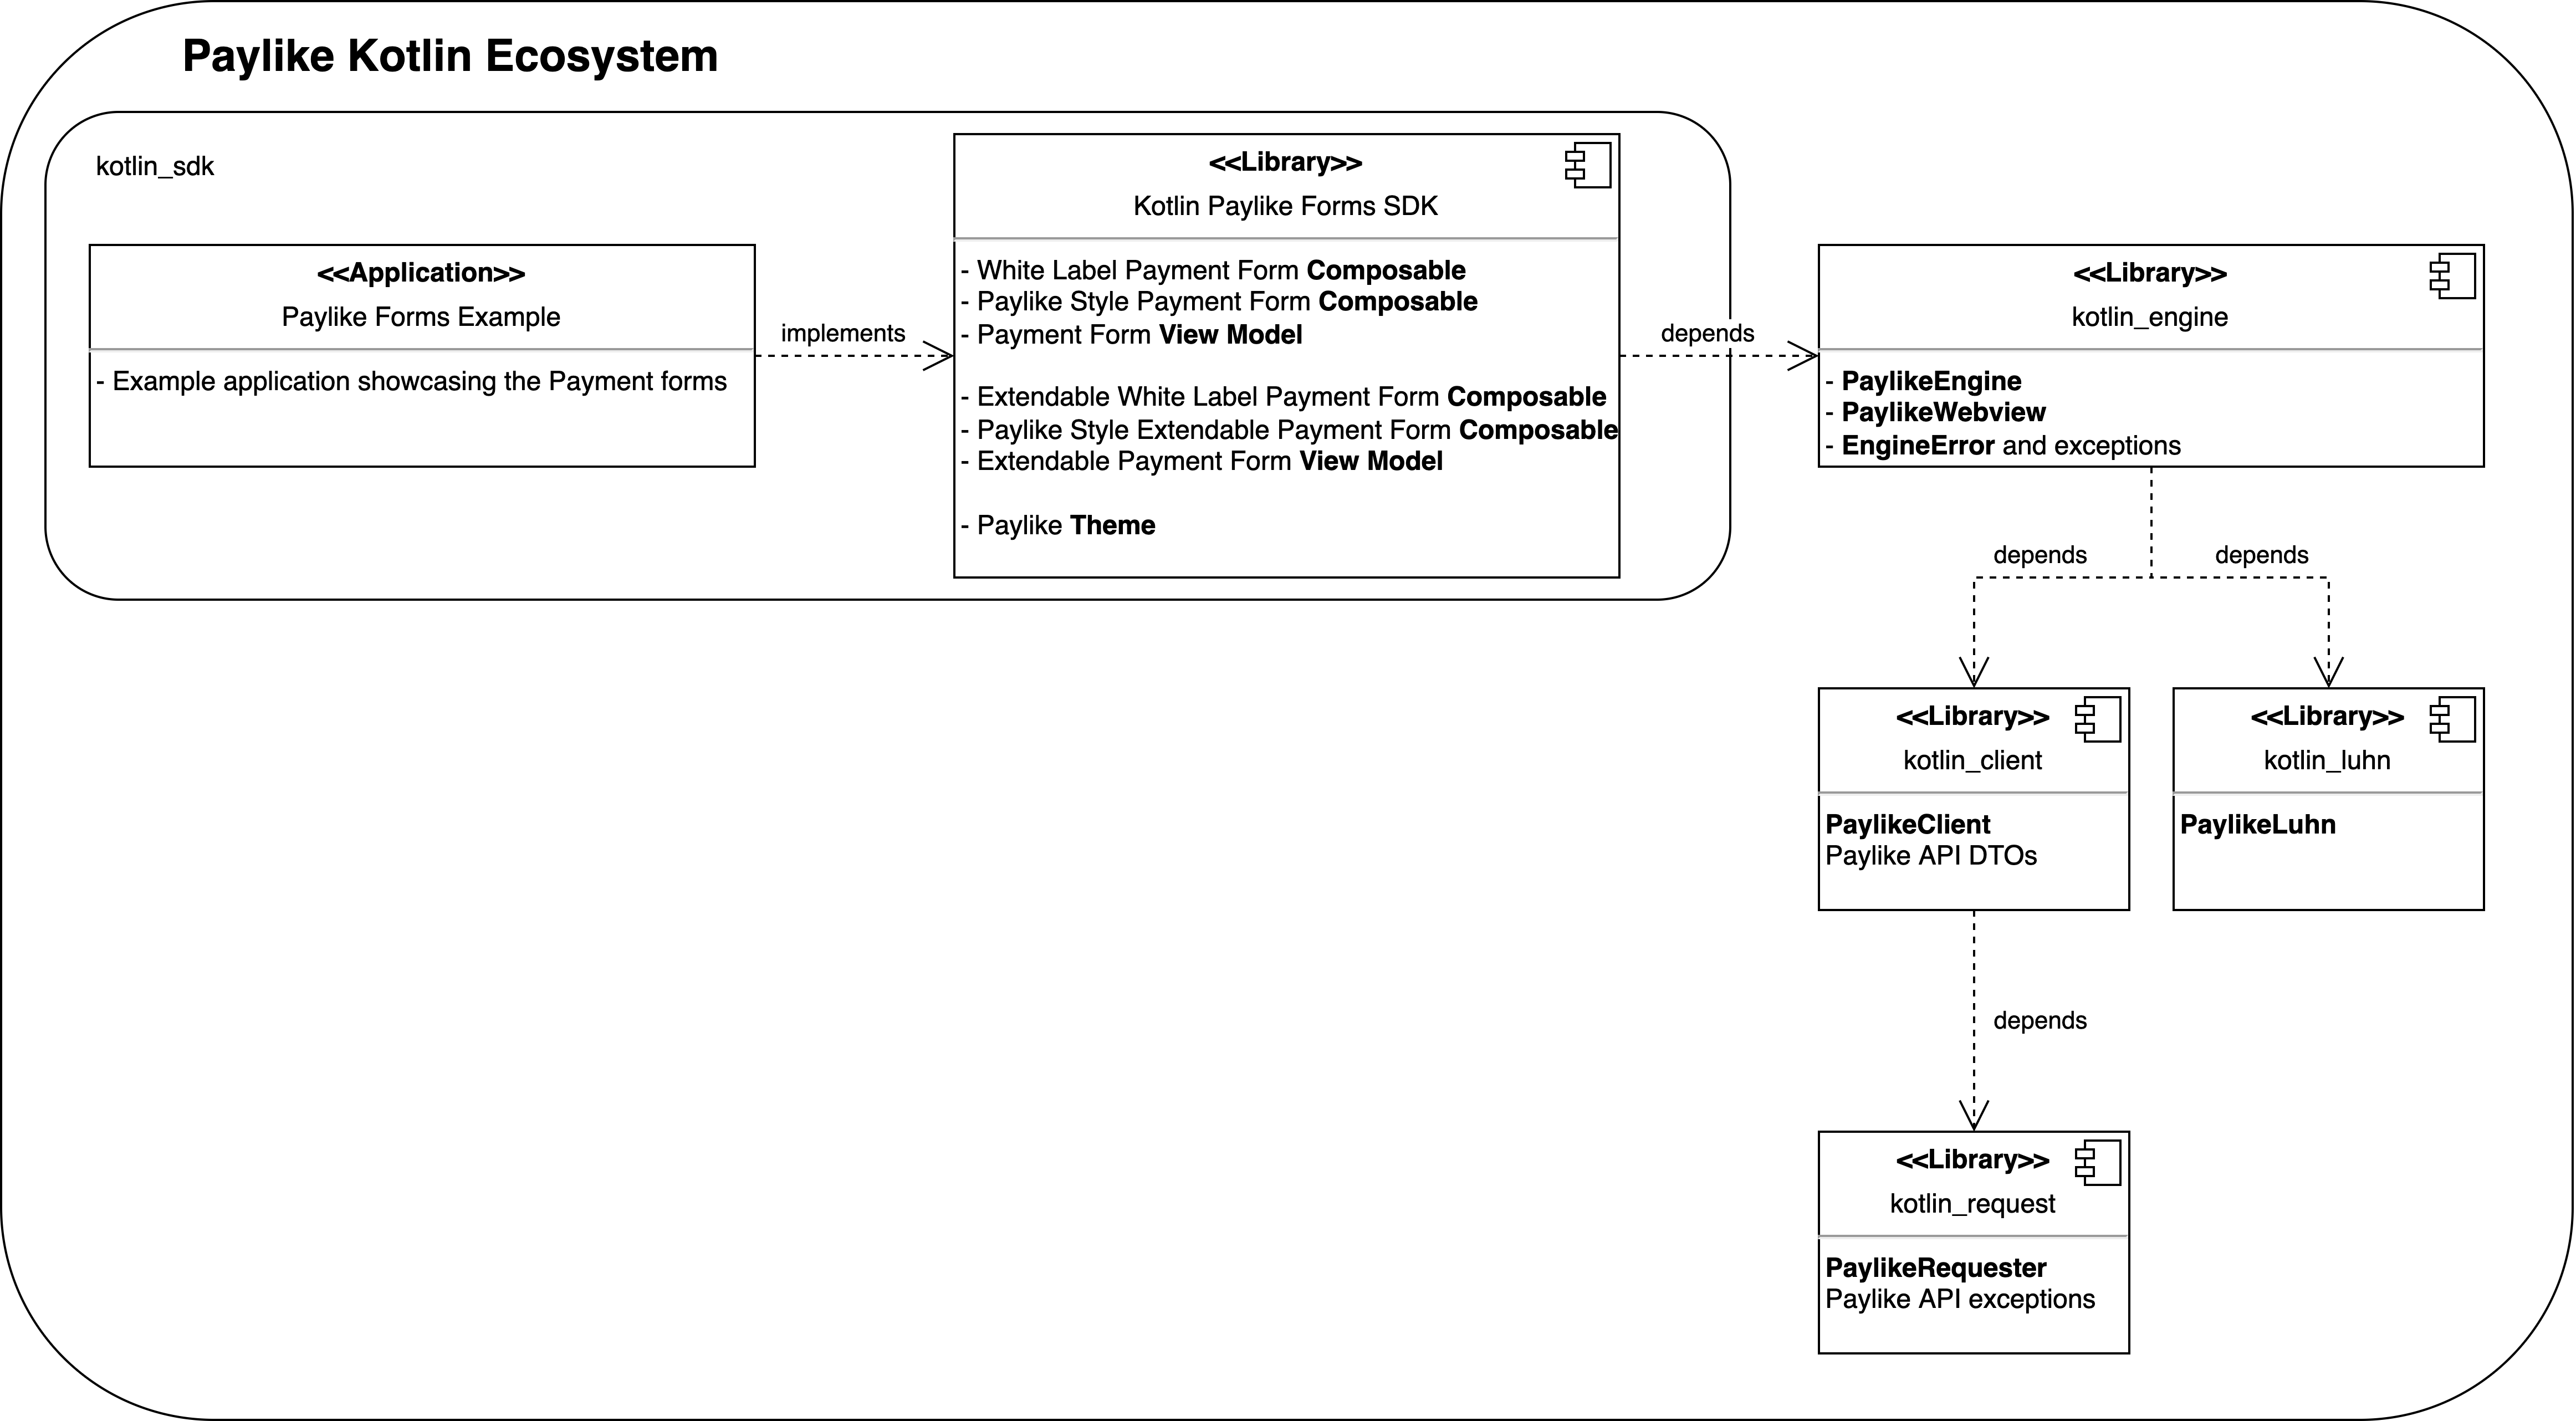 System architecture diagram of the Paylike Kotlin Ecosystem